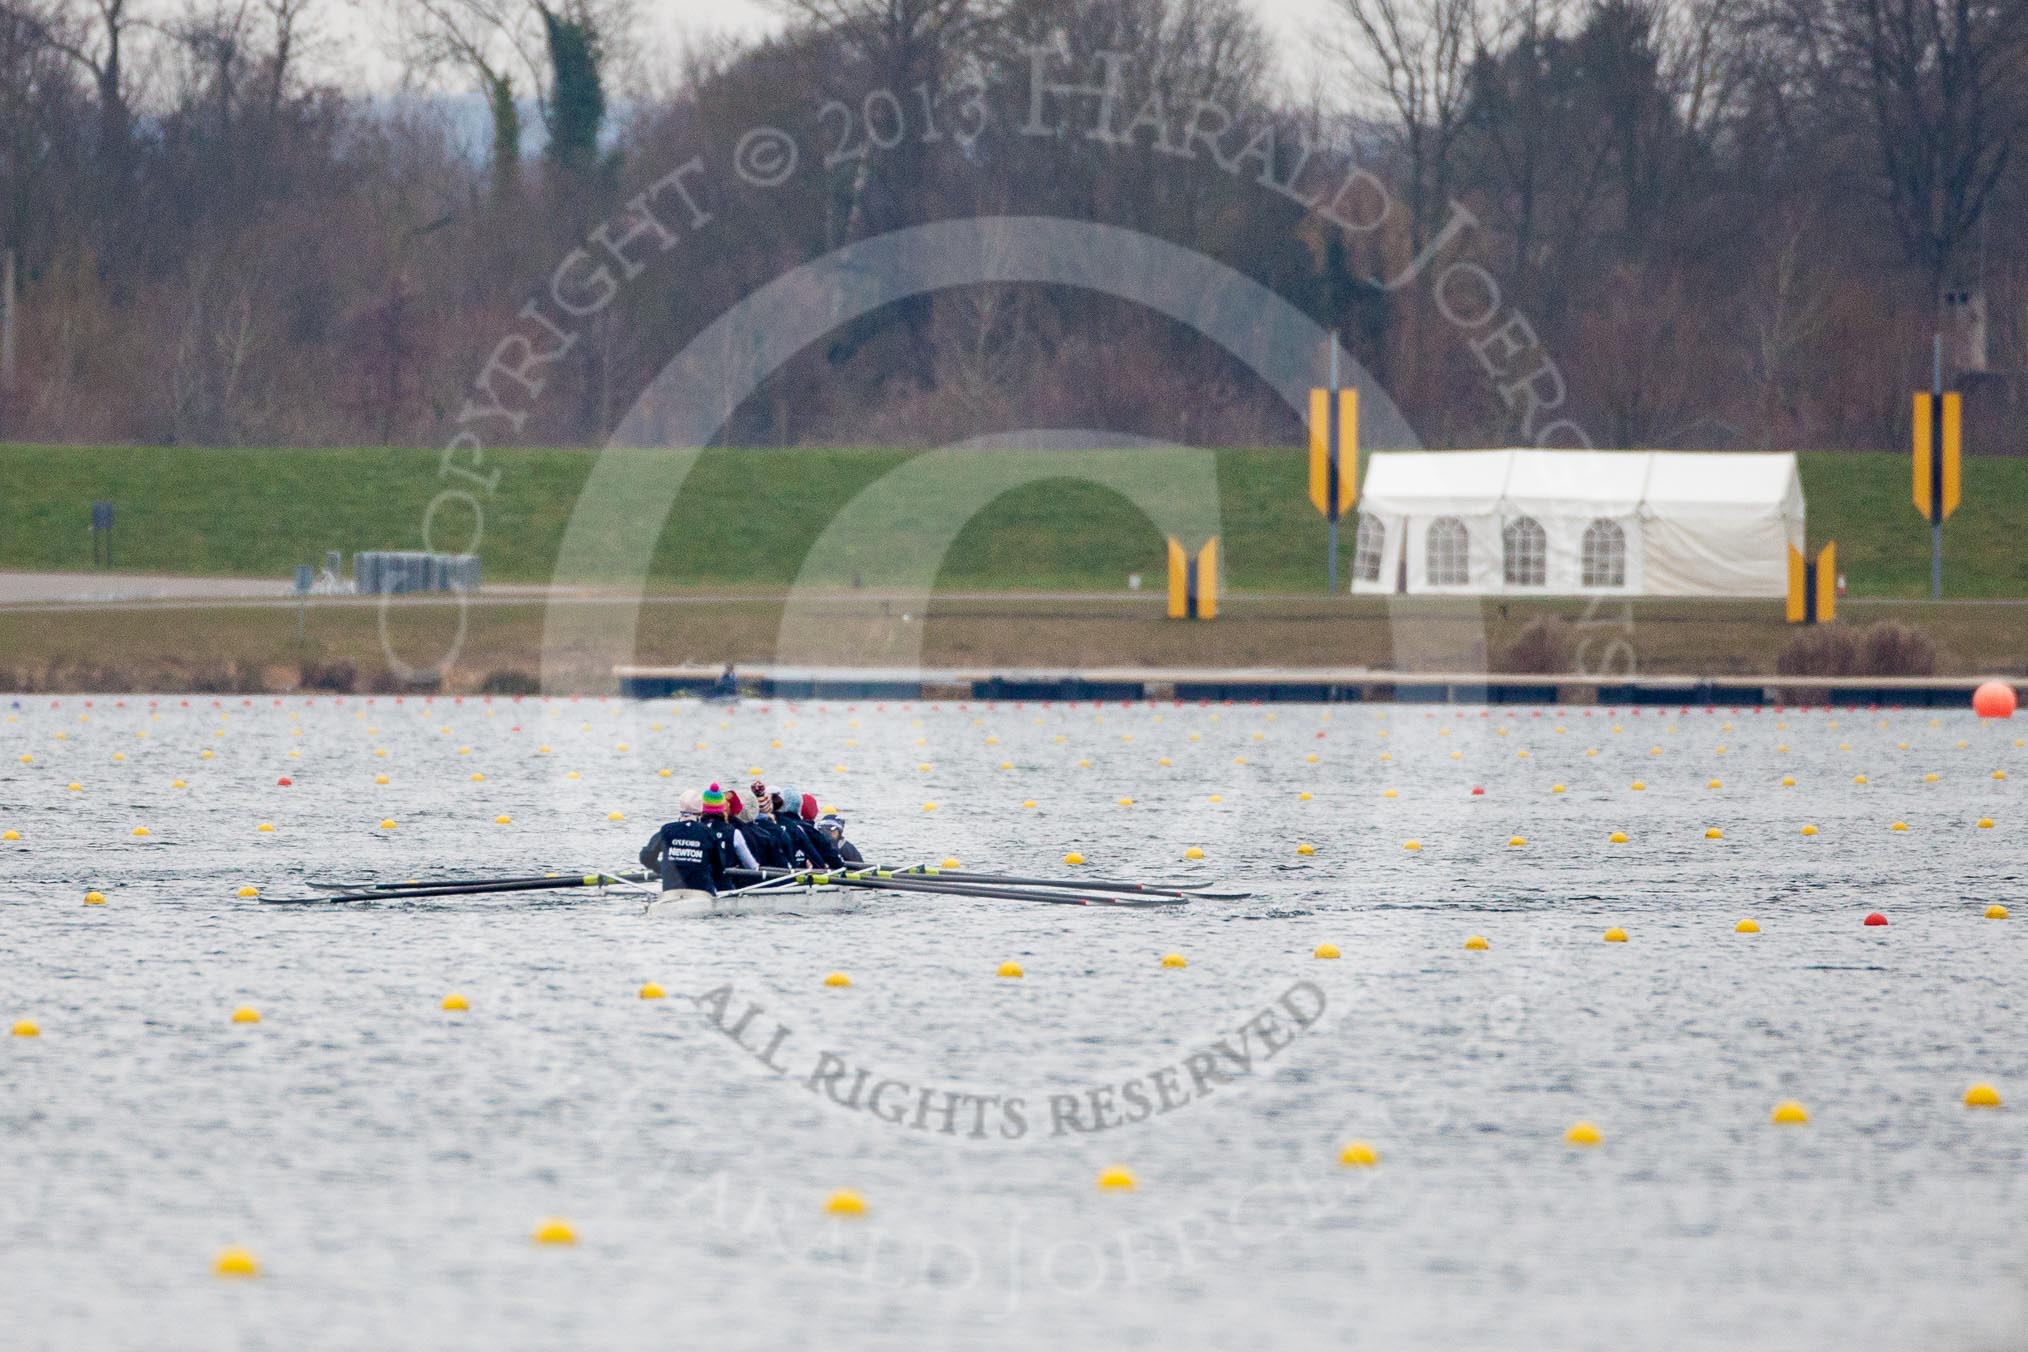 The Boat Race season 2013 - fixture OUWBC vs Molesey BC: The OUWBC Blue Boat during a training session at Dorney Lake..
Dorney Lake,
Dorney, Windsor,
Berkshire,
United Kingdom,
on 24 February 2013 at 11:43, image #57